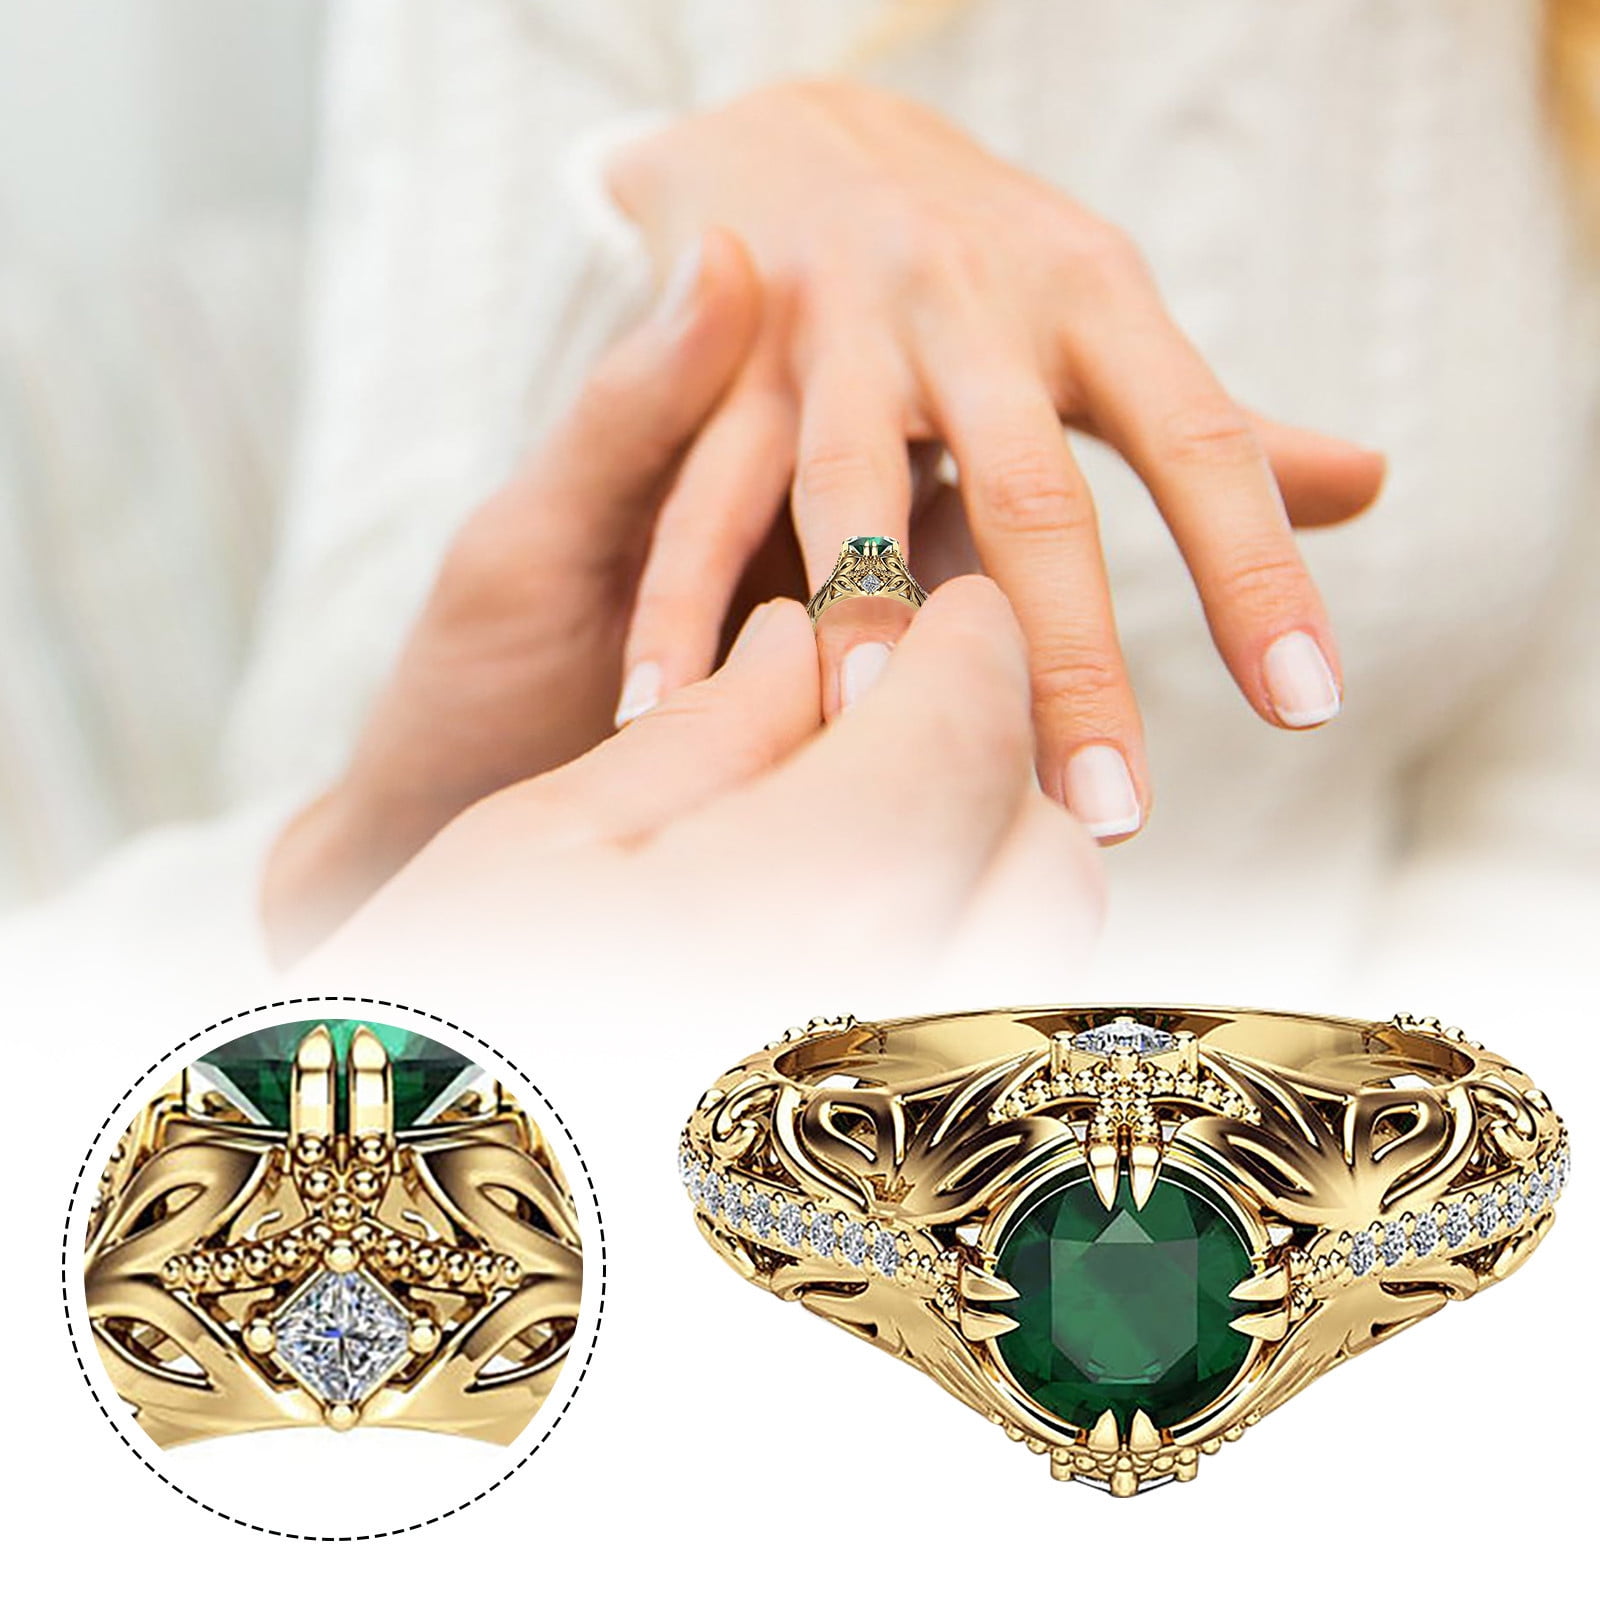 Golden & Silver Ring With White & Green Stones. An elegant design with –  Rose Ran